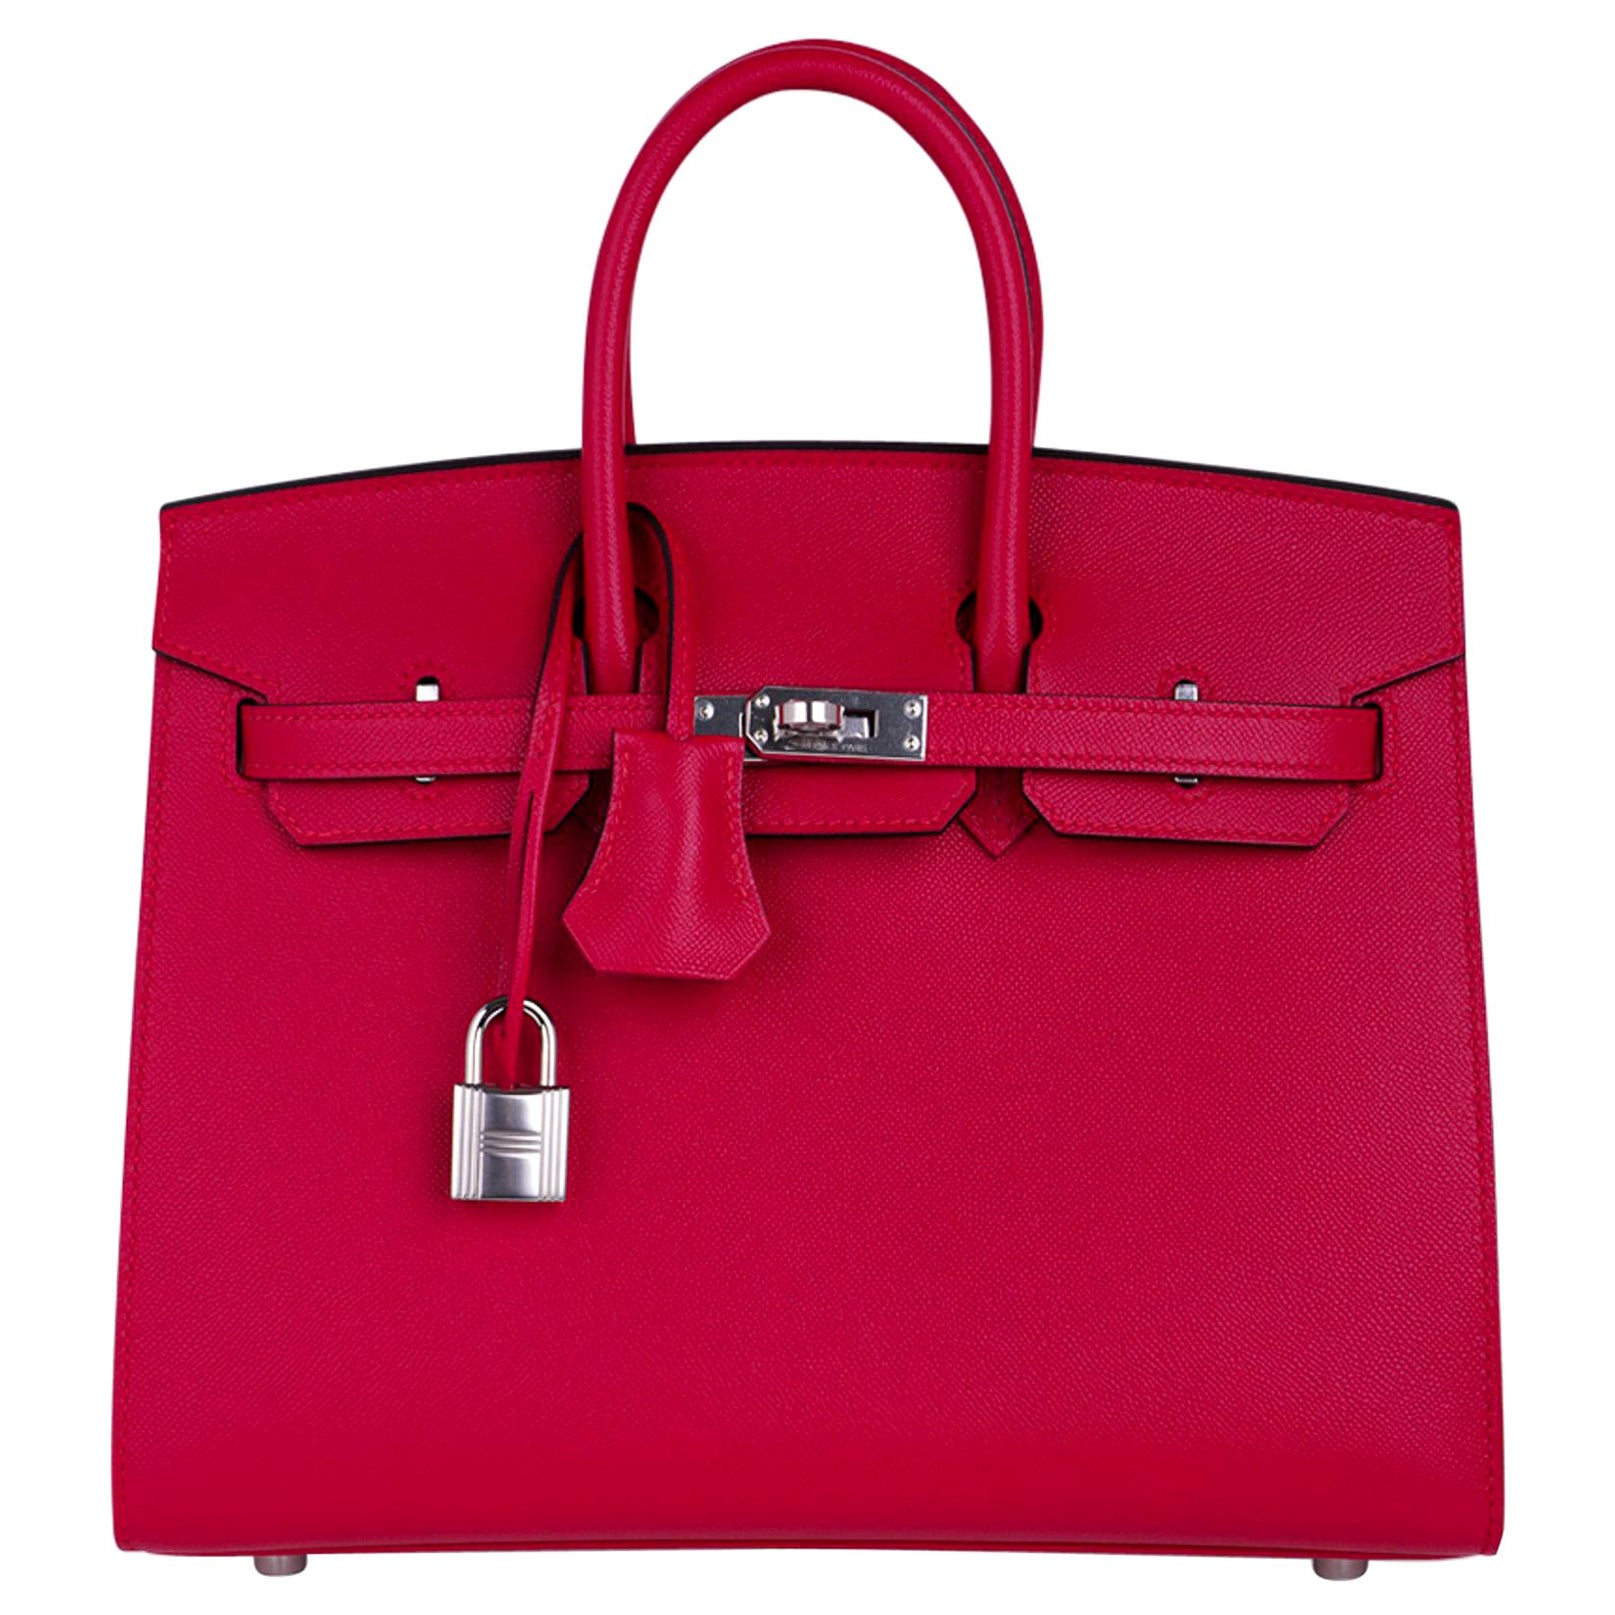 Special/limited edition Hermes birkin! Lovely 3-in-1 